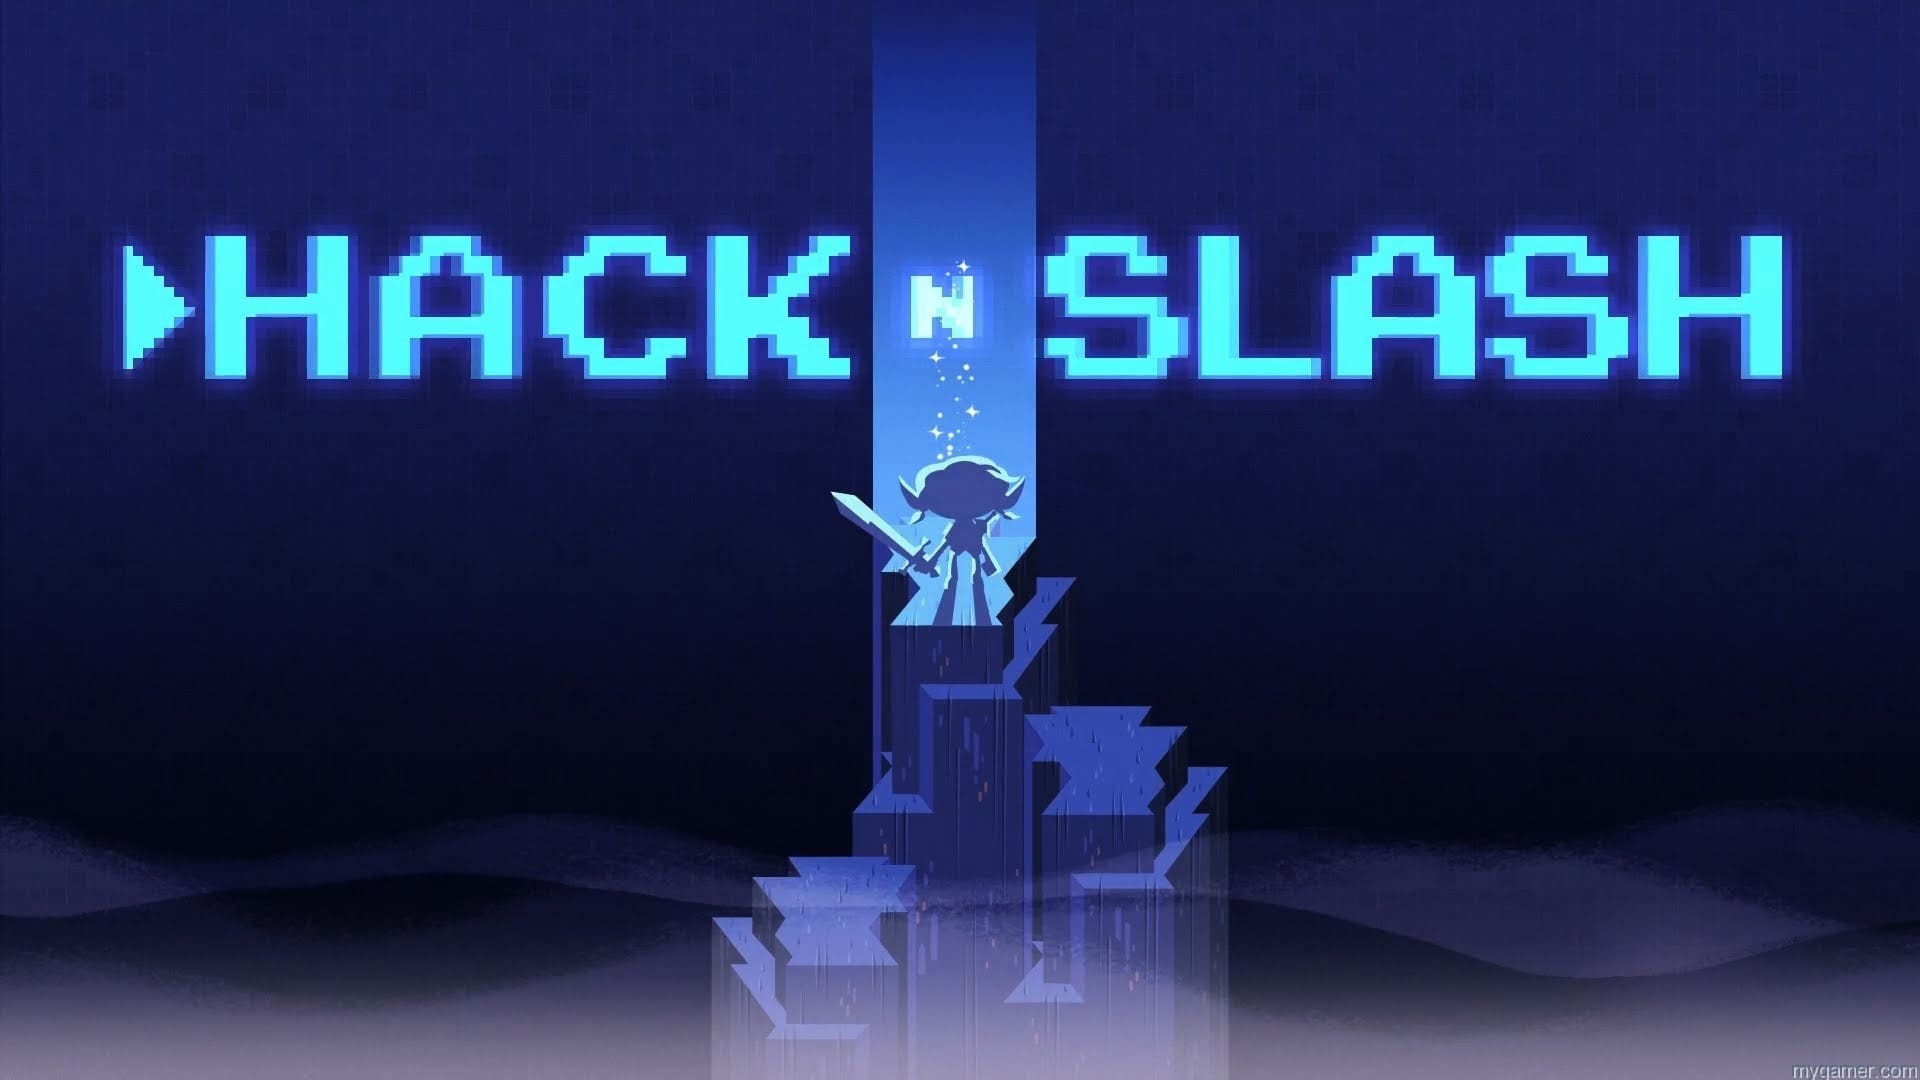 Hack 'n' Slash PC Review - Video Game Reviews, Previews and News - myGamer